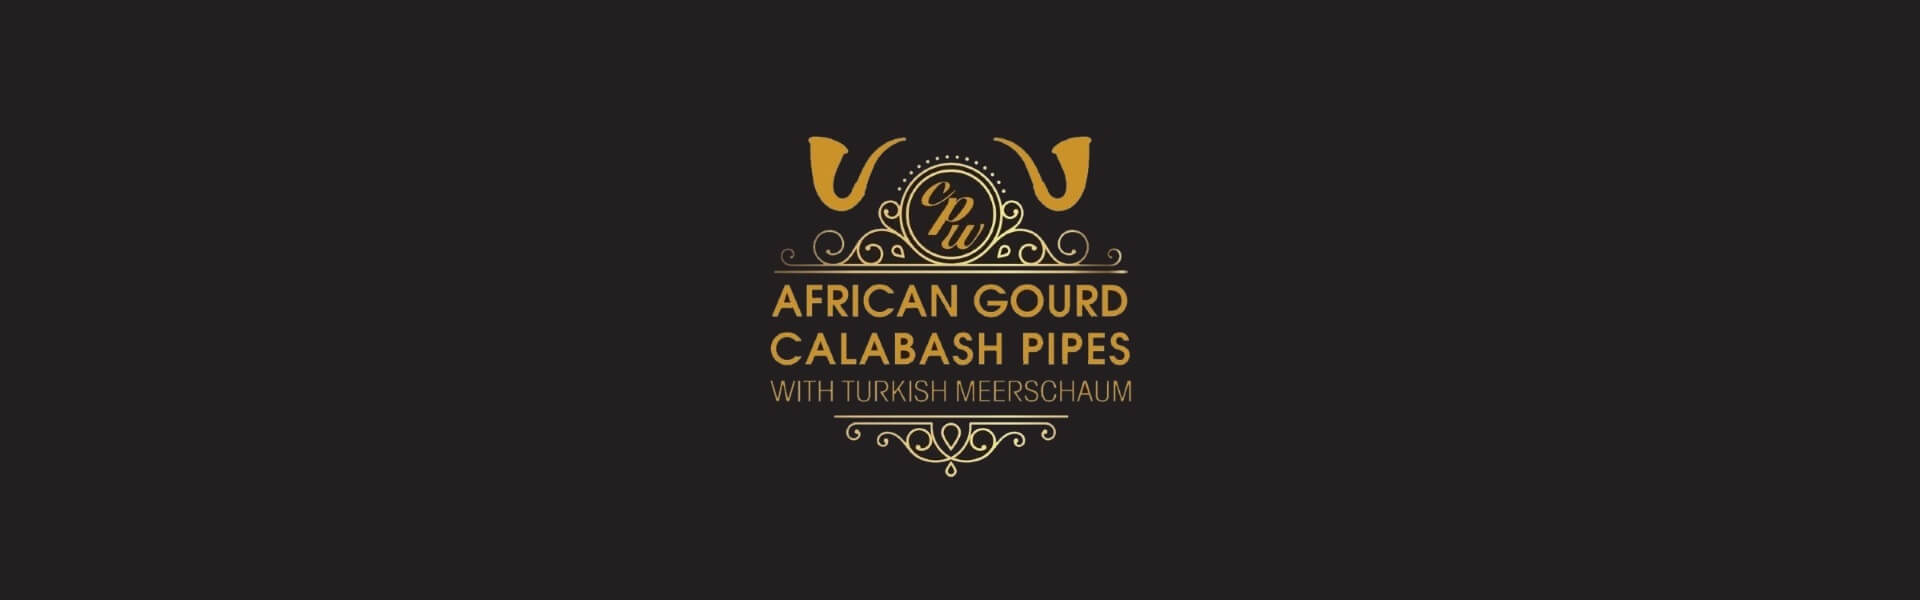 CPW Calabash Pipes